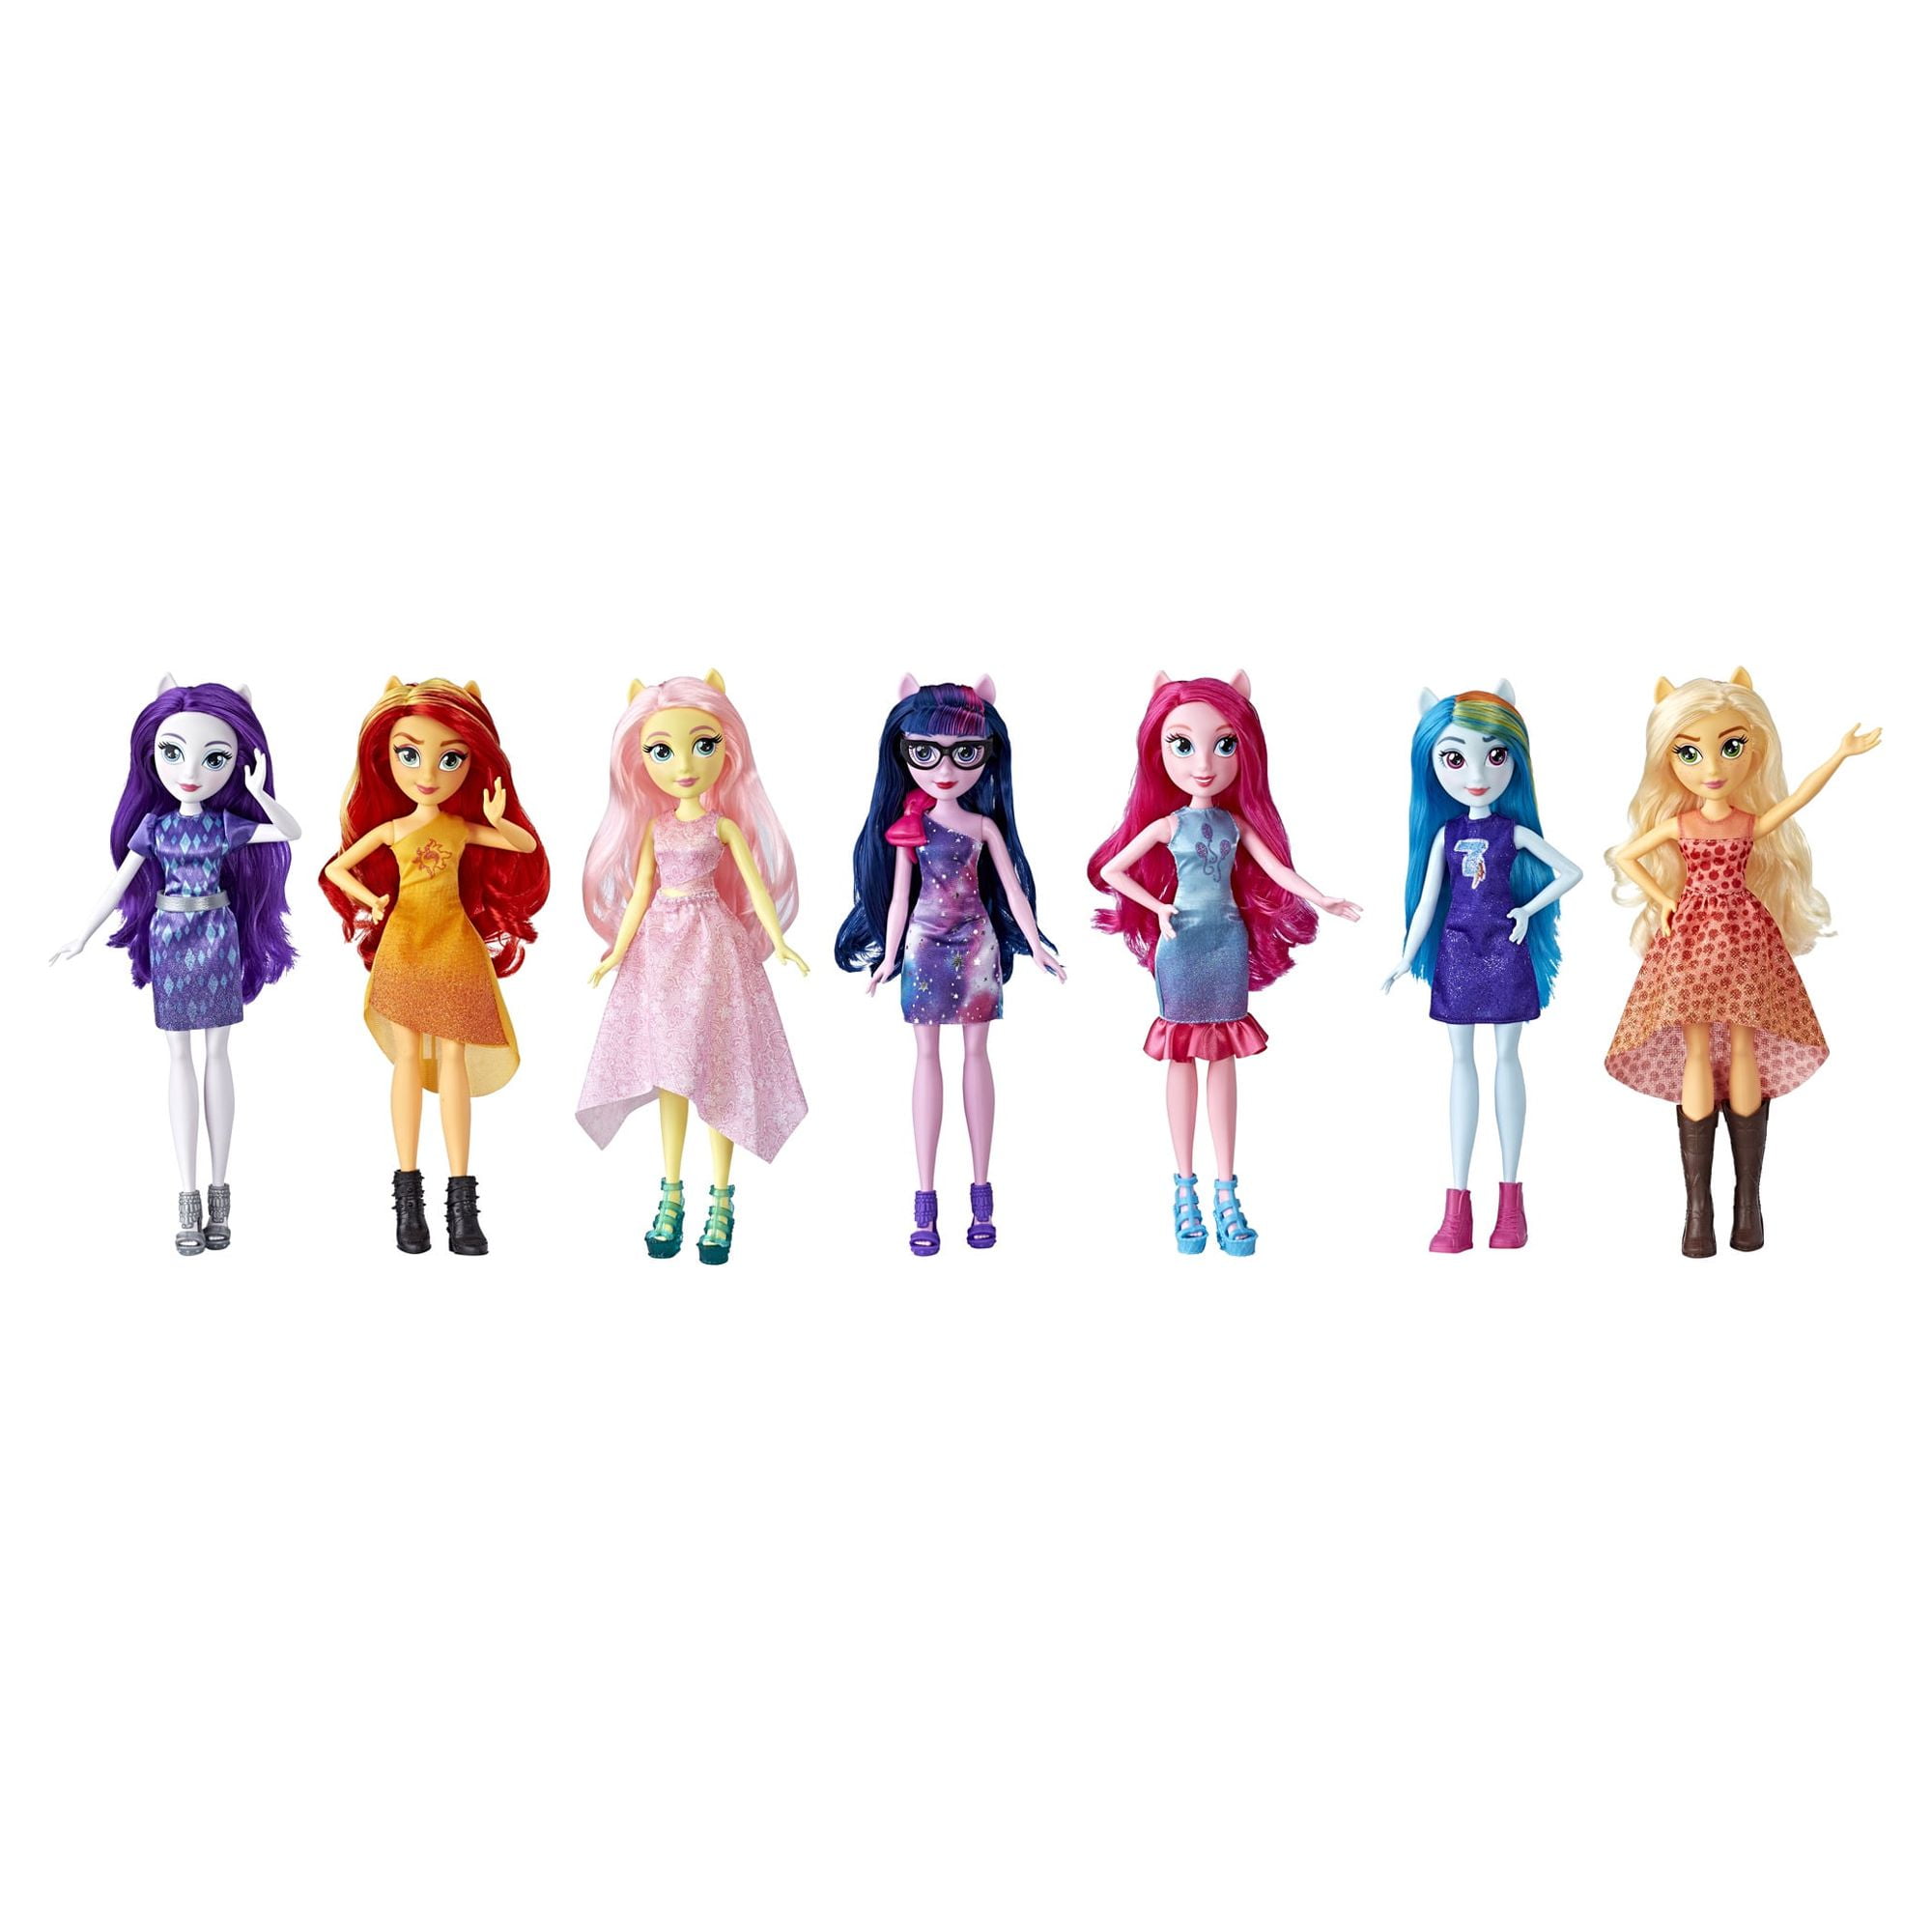 My Little Pony: Equestria Girls: Friendship From Different Worlds